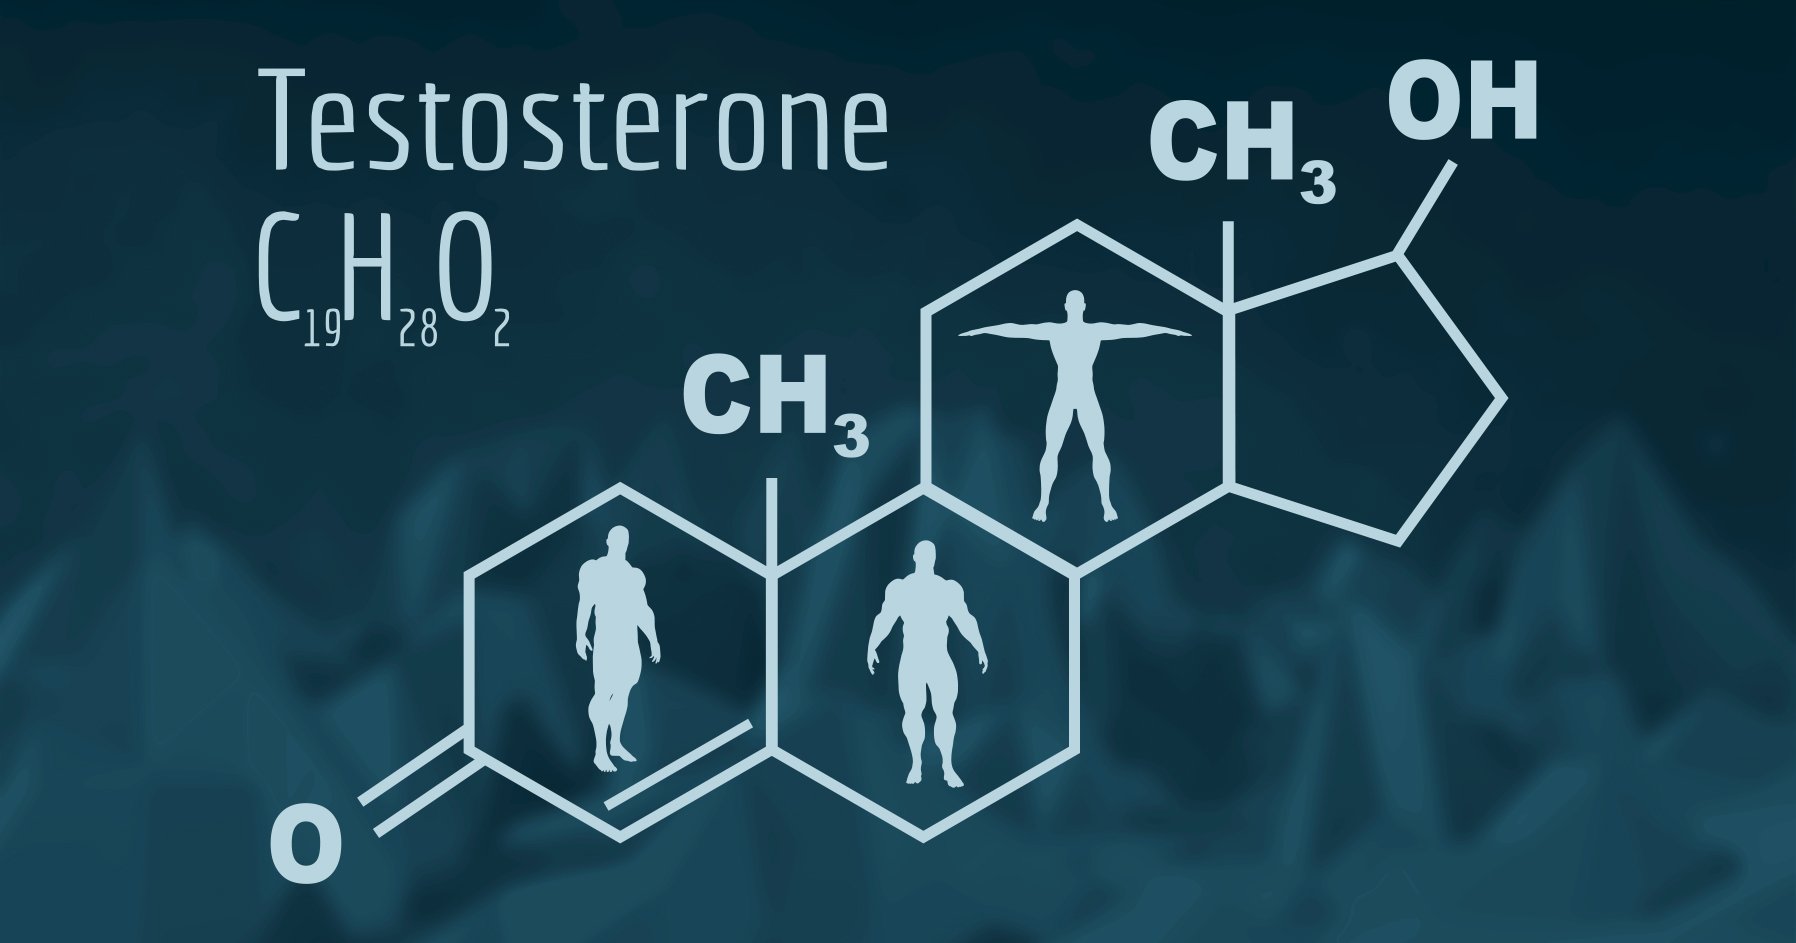 Image of a chart on testosterone.